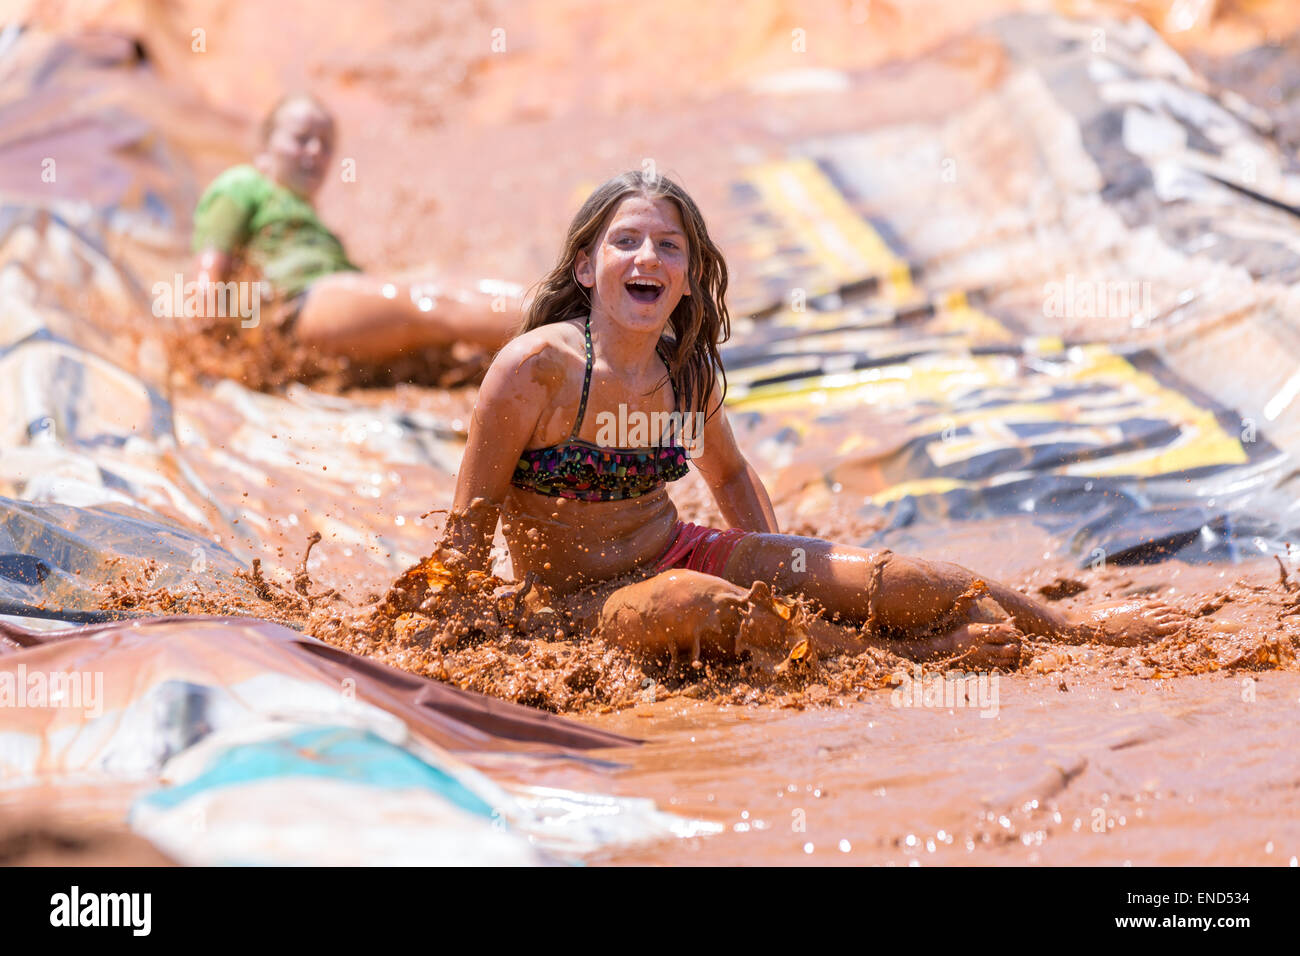 A young girl slips down a mud slide during the 2015 National Red Neck Championships May 2, 2015 in Augusta, Georgia. Hundreds of people joined in a day of country sport and activities. Stock Photo